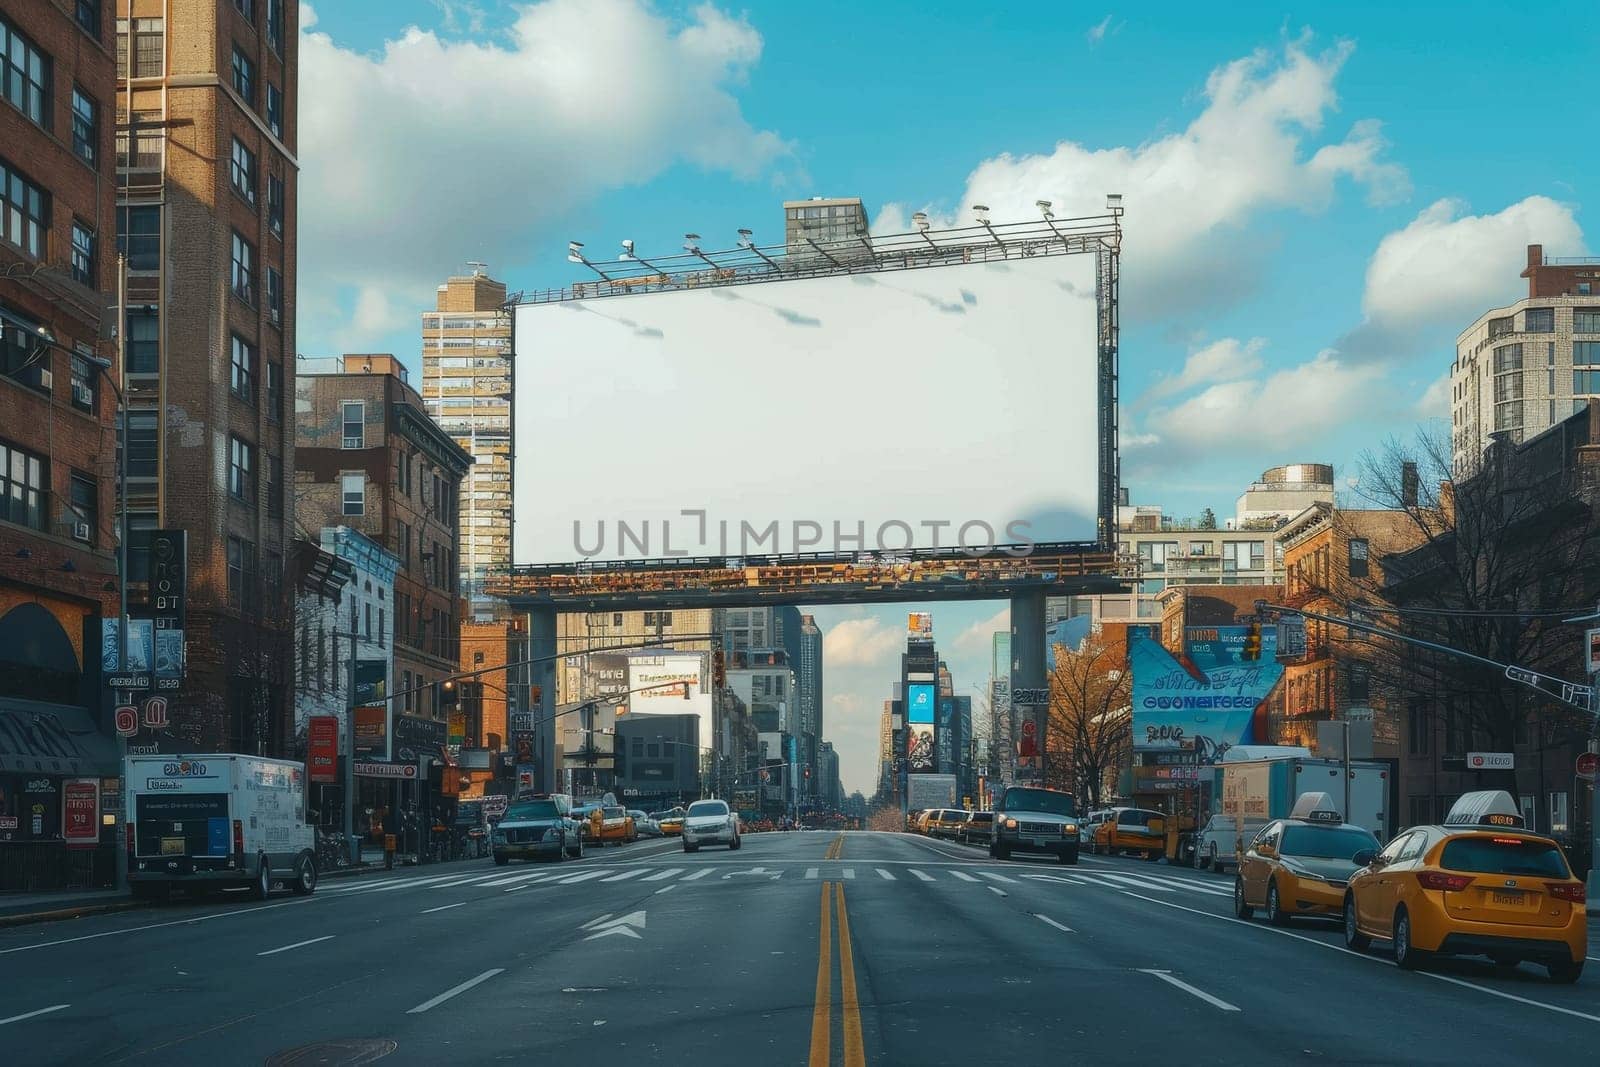 The billboard is white and is surrounded by tall buildings. The street is filled with cars and trucks. The scene is bustling and lively